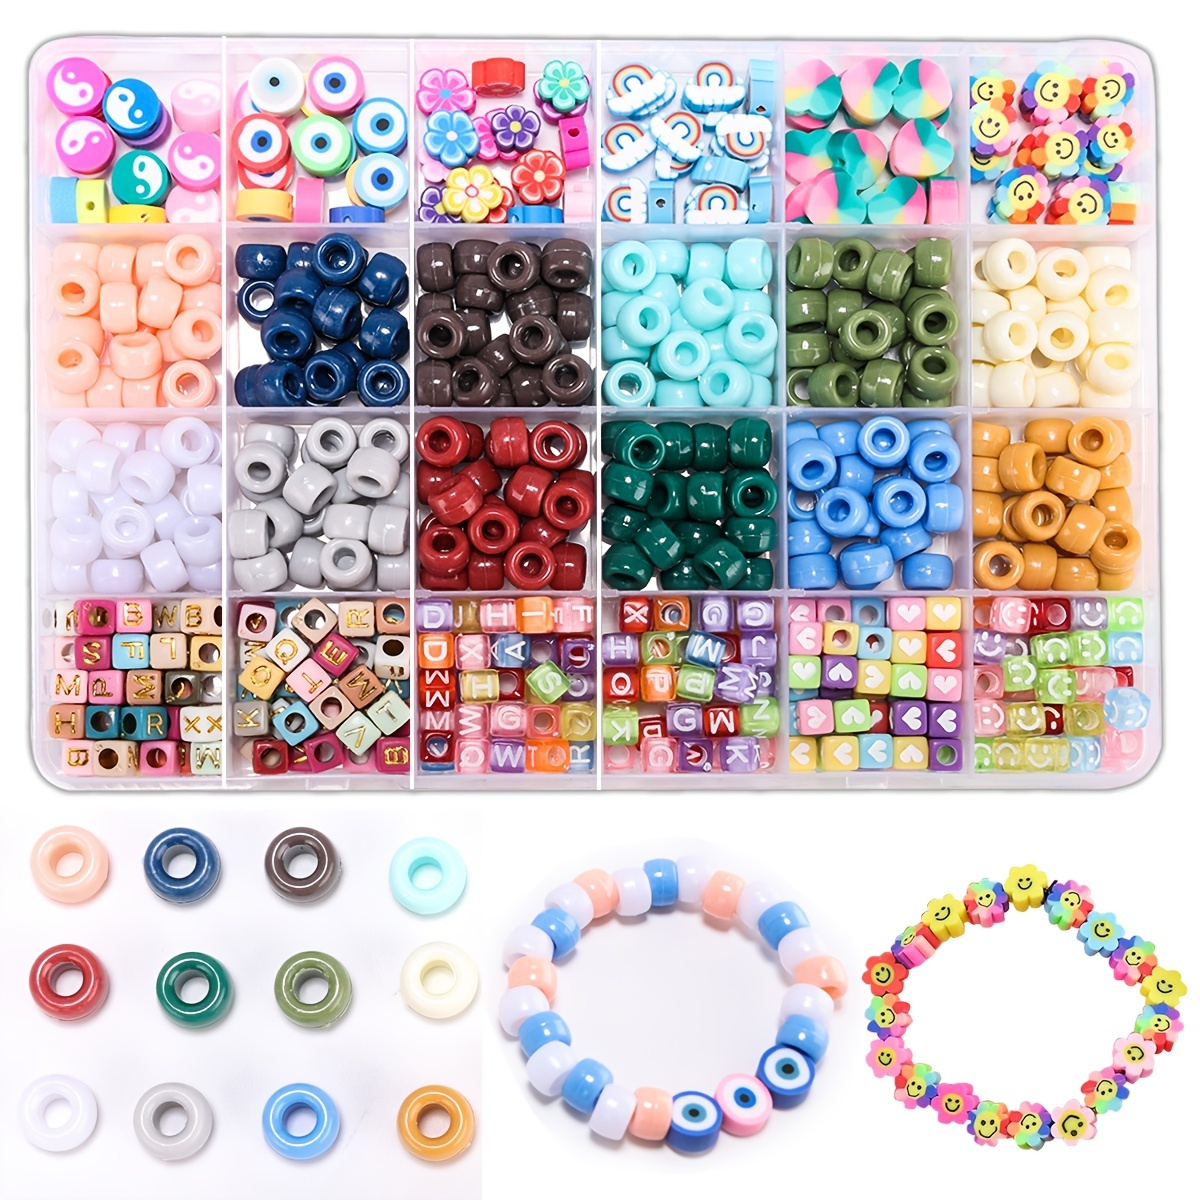 Bead Bracelet Making Kit, Cridoz Bead Kits for Bracelets Making with Pony  Beads, Polymer Fruit Clay Beads, Smile Face Charm Beads, Letter Beads for